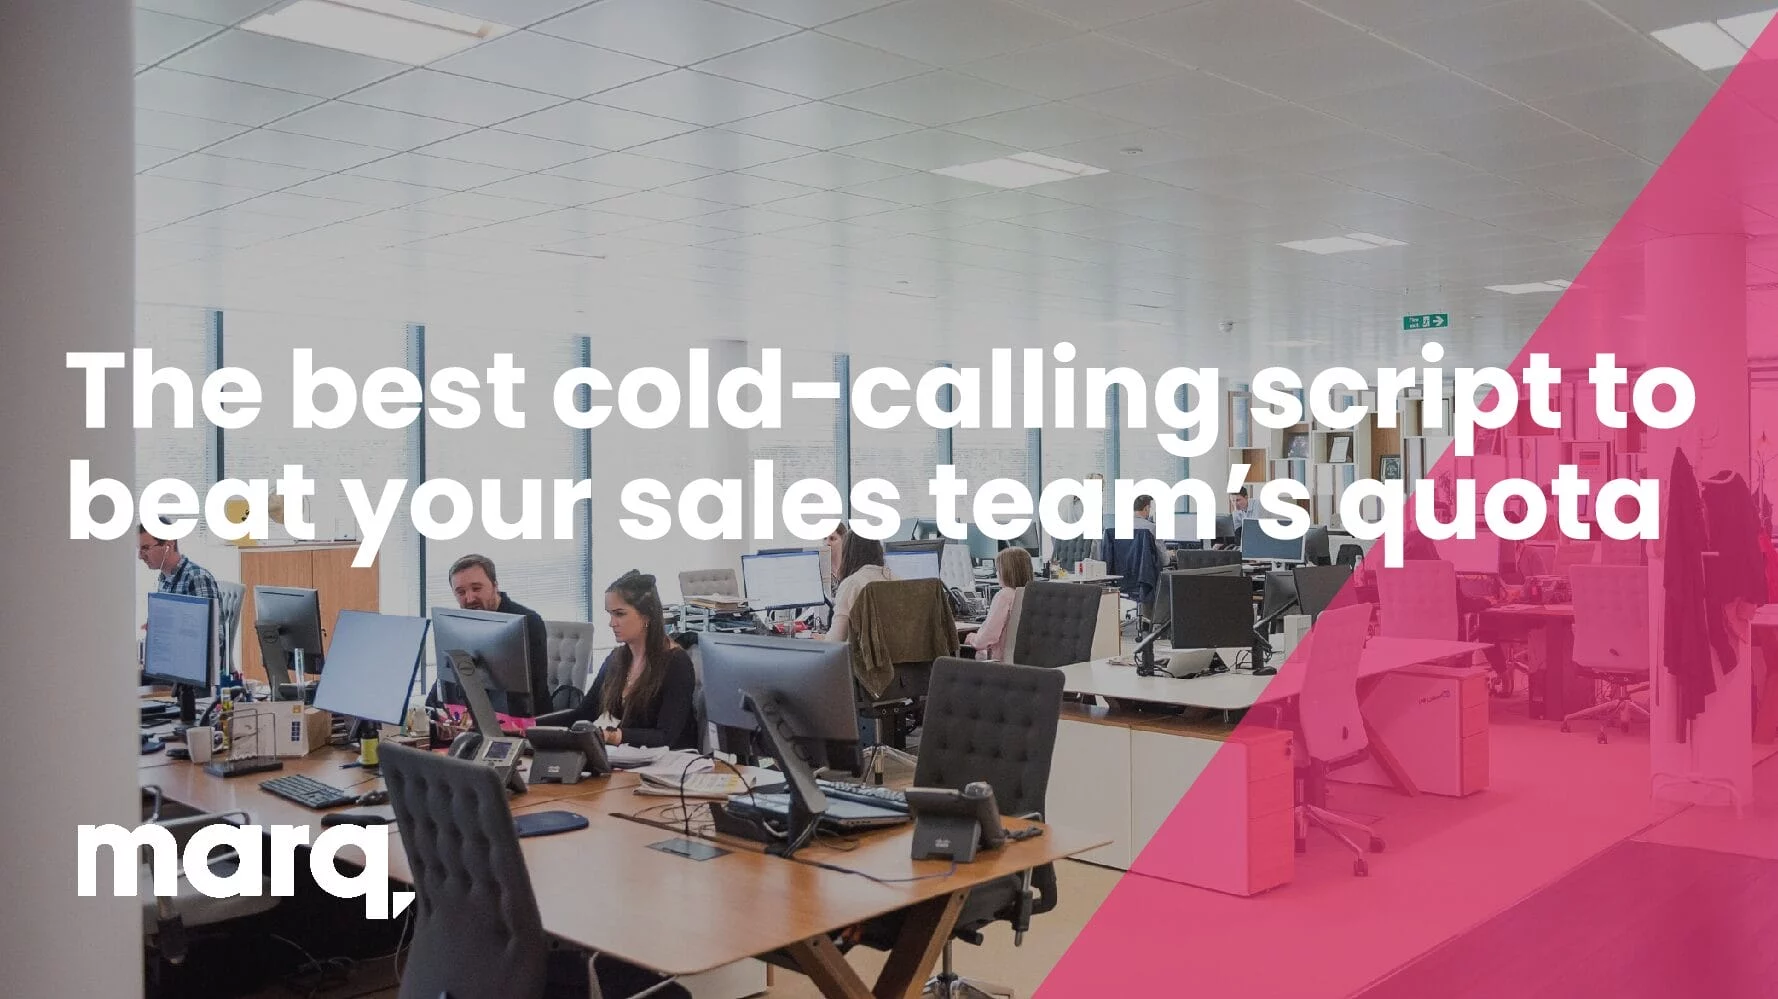 The best cold-calling script to beat your sales team’s quota